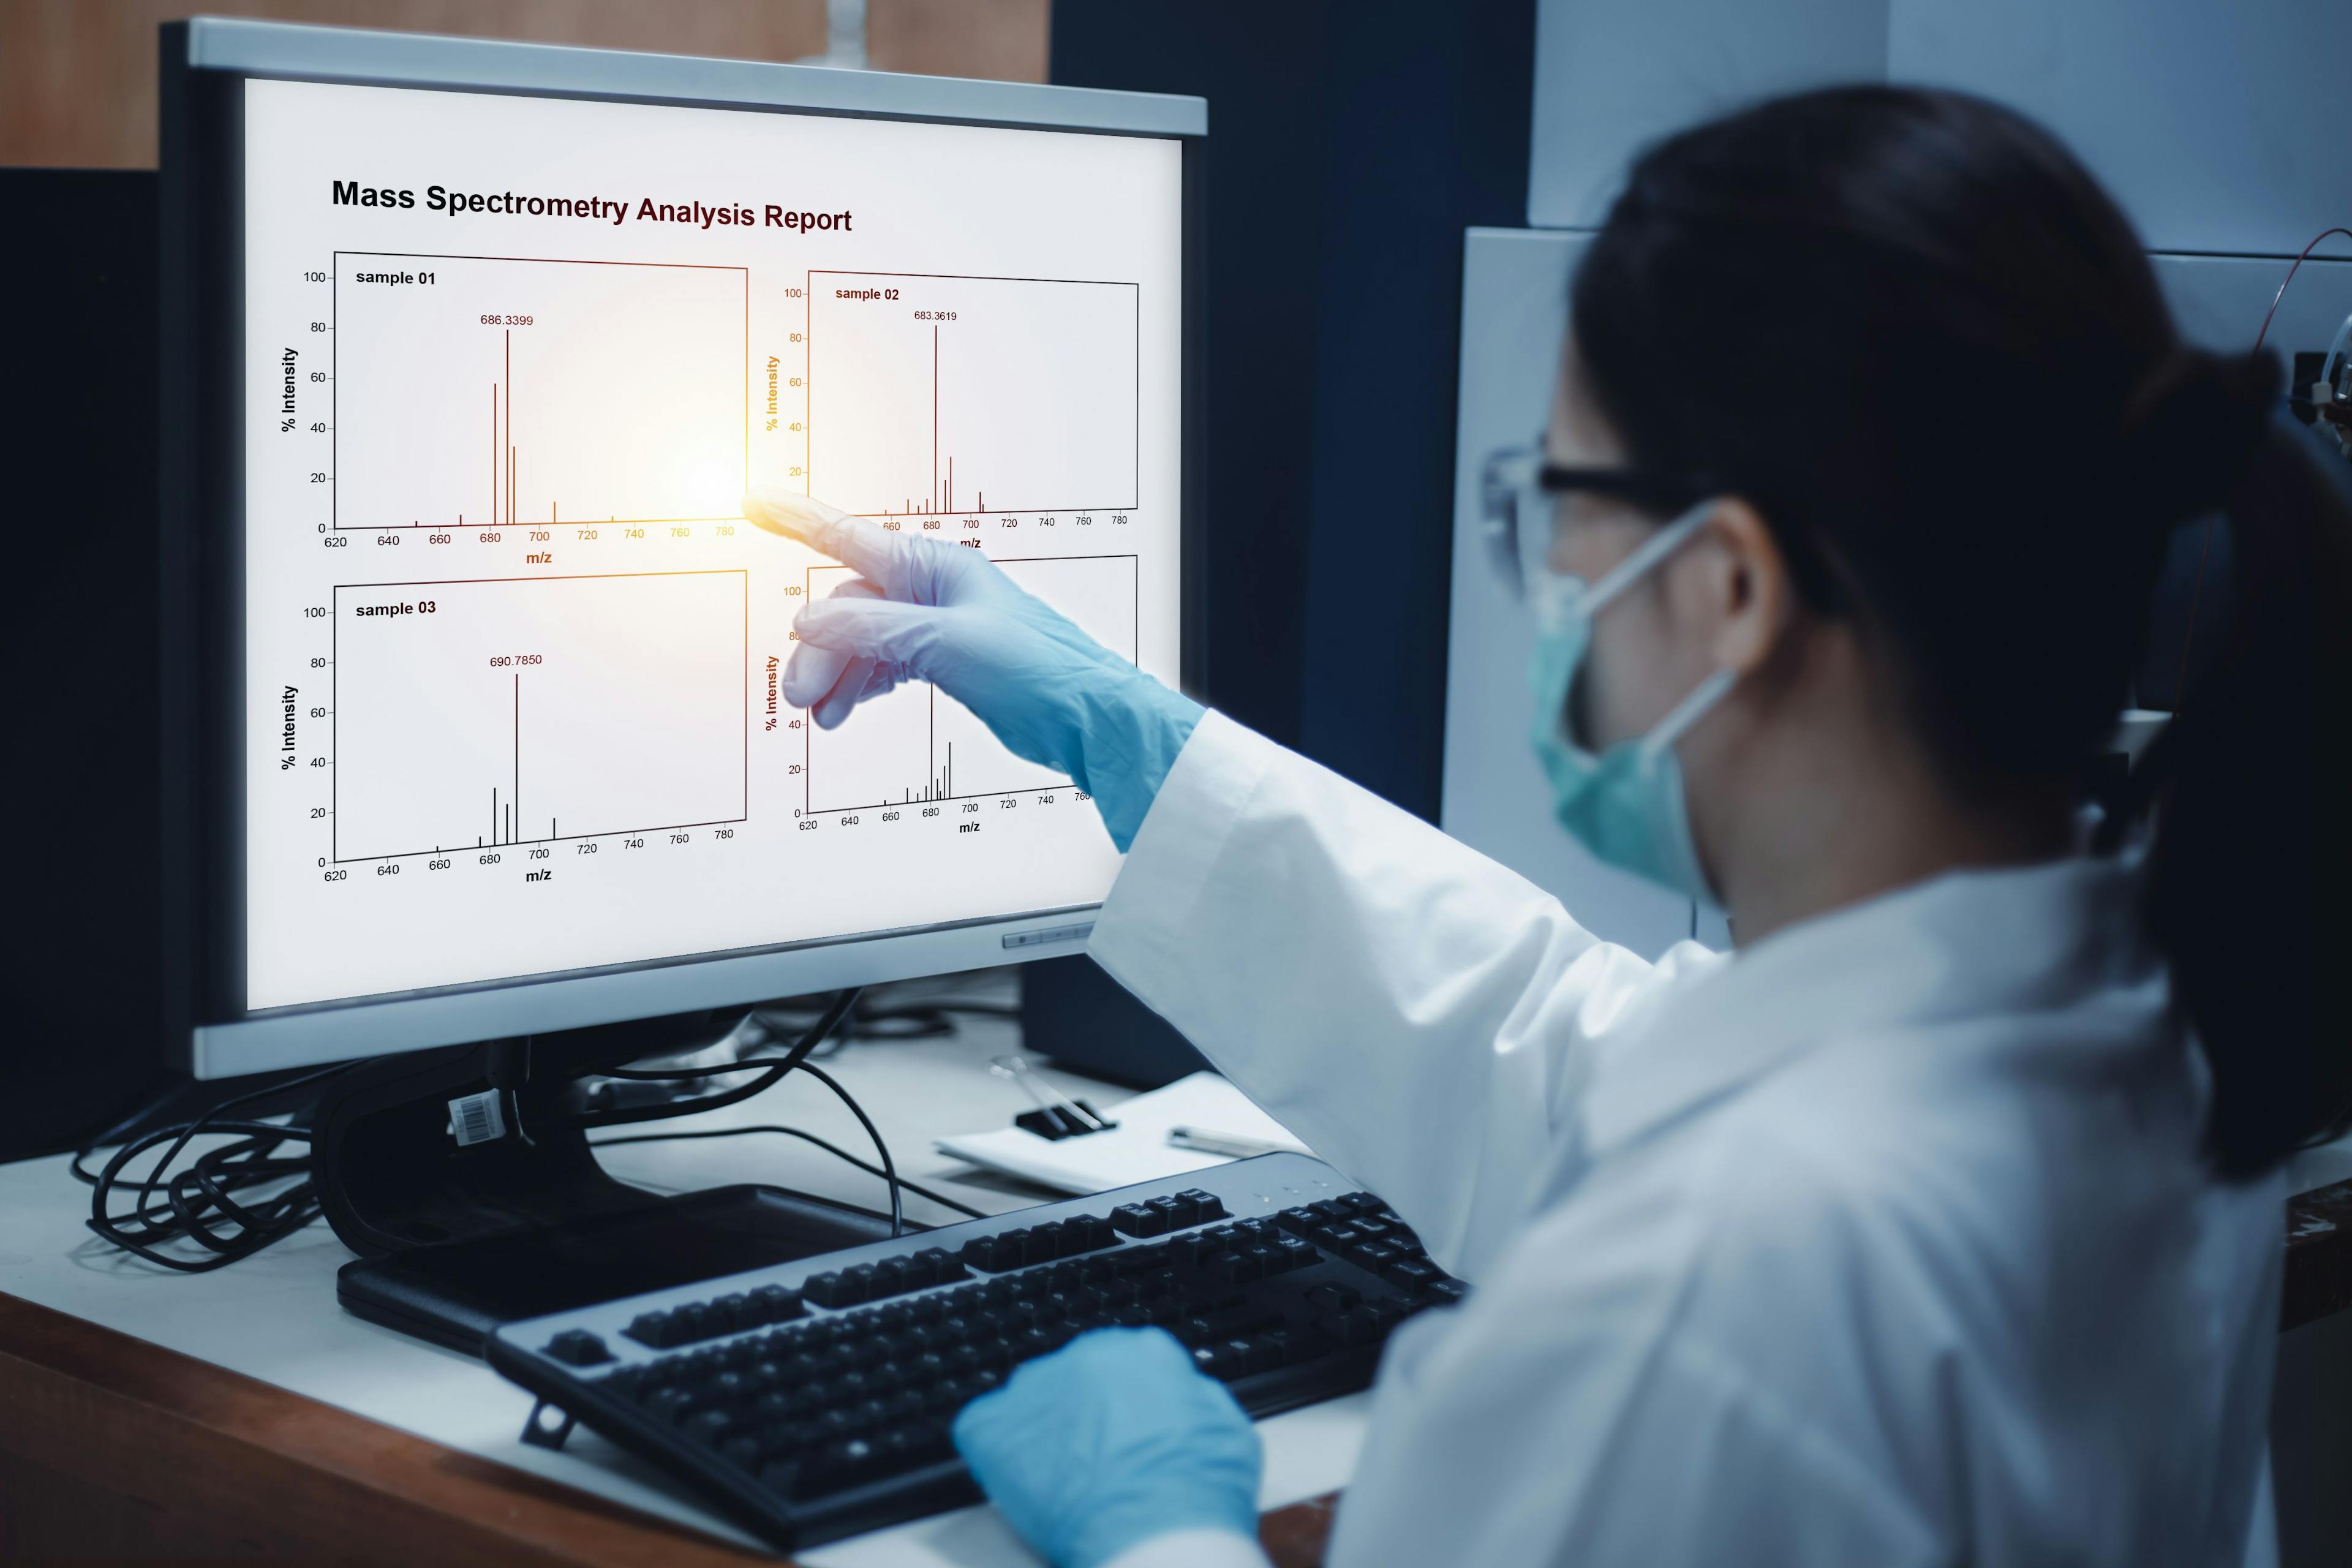 Scientist woman indicated mass spectrometry results from analysis differences of samples shown on the computer in the laboratory. | Image Credit: © S. Singha - stock.adobe.com